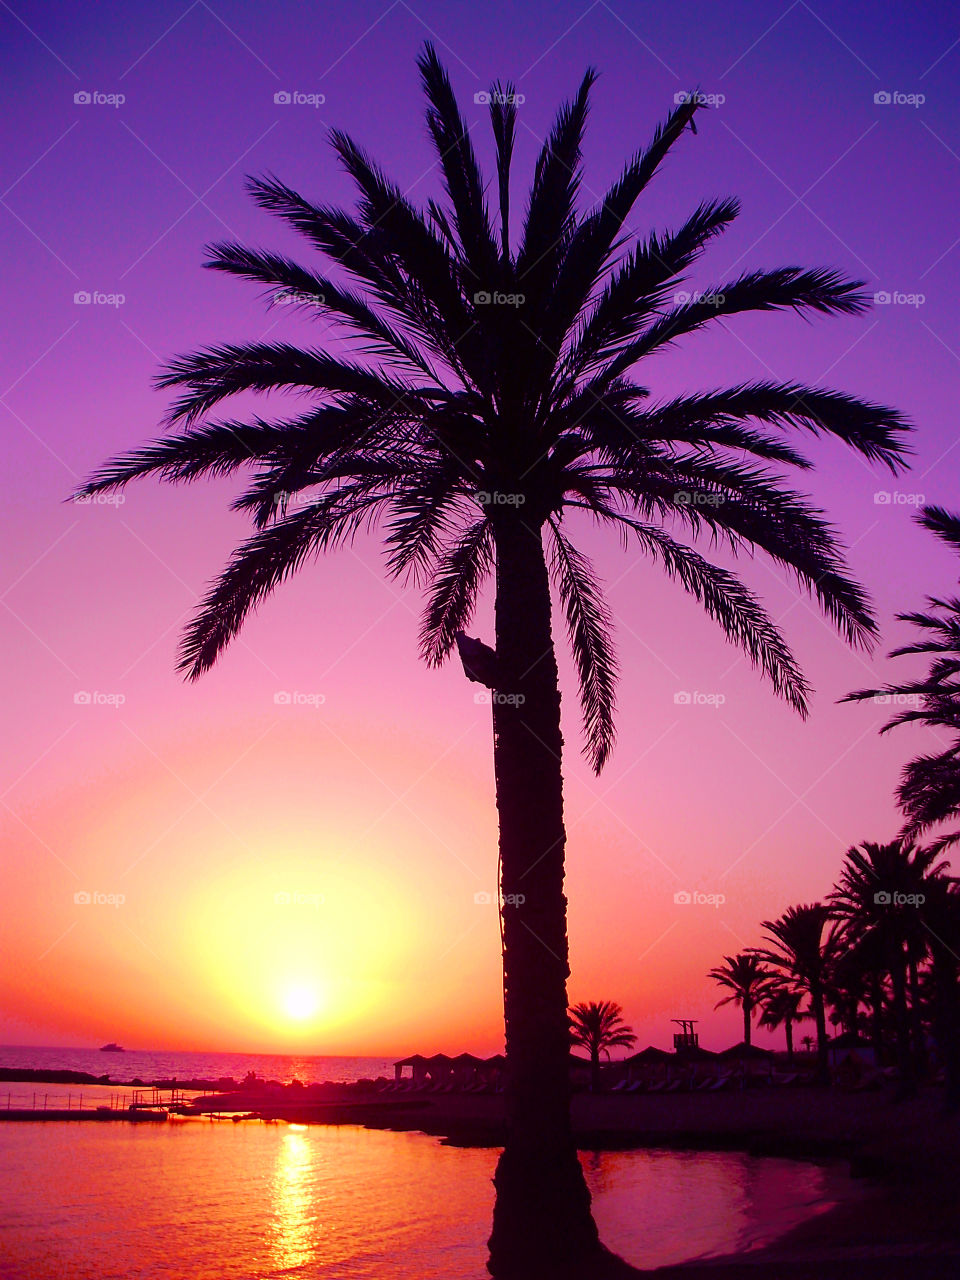 Silhouettes of palm trees at tropical beach on sunset sky background 